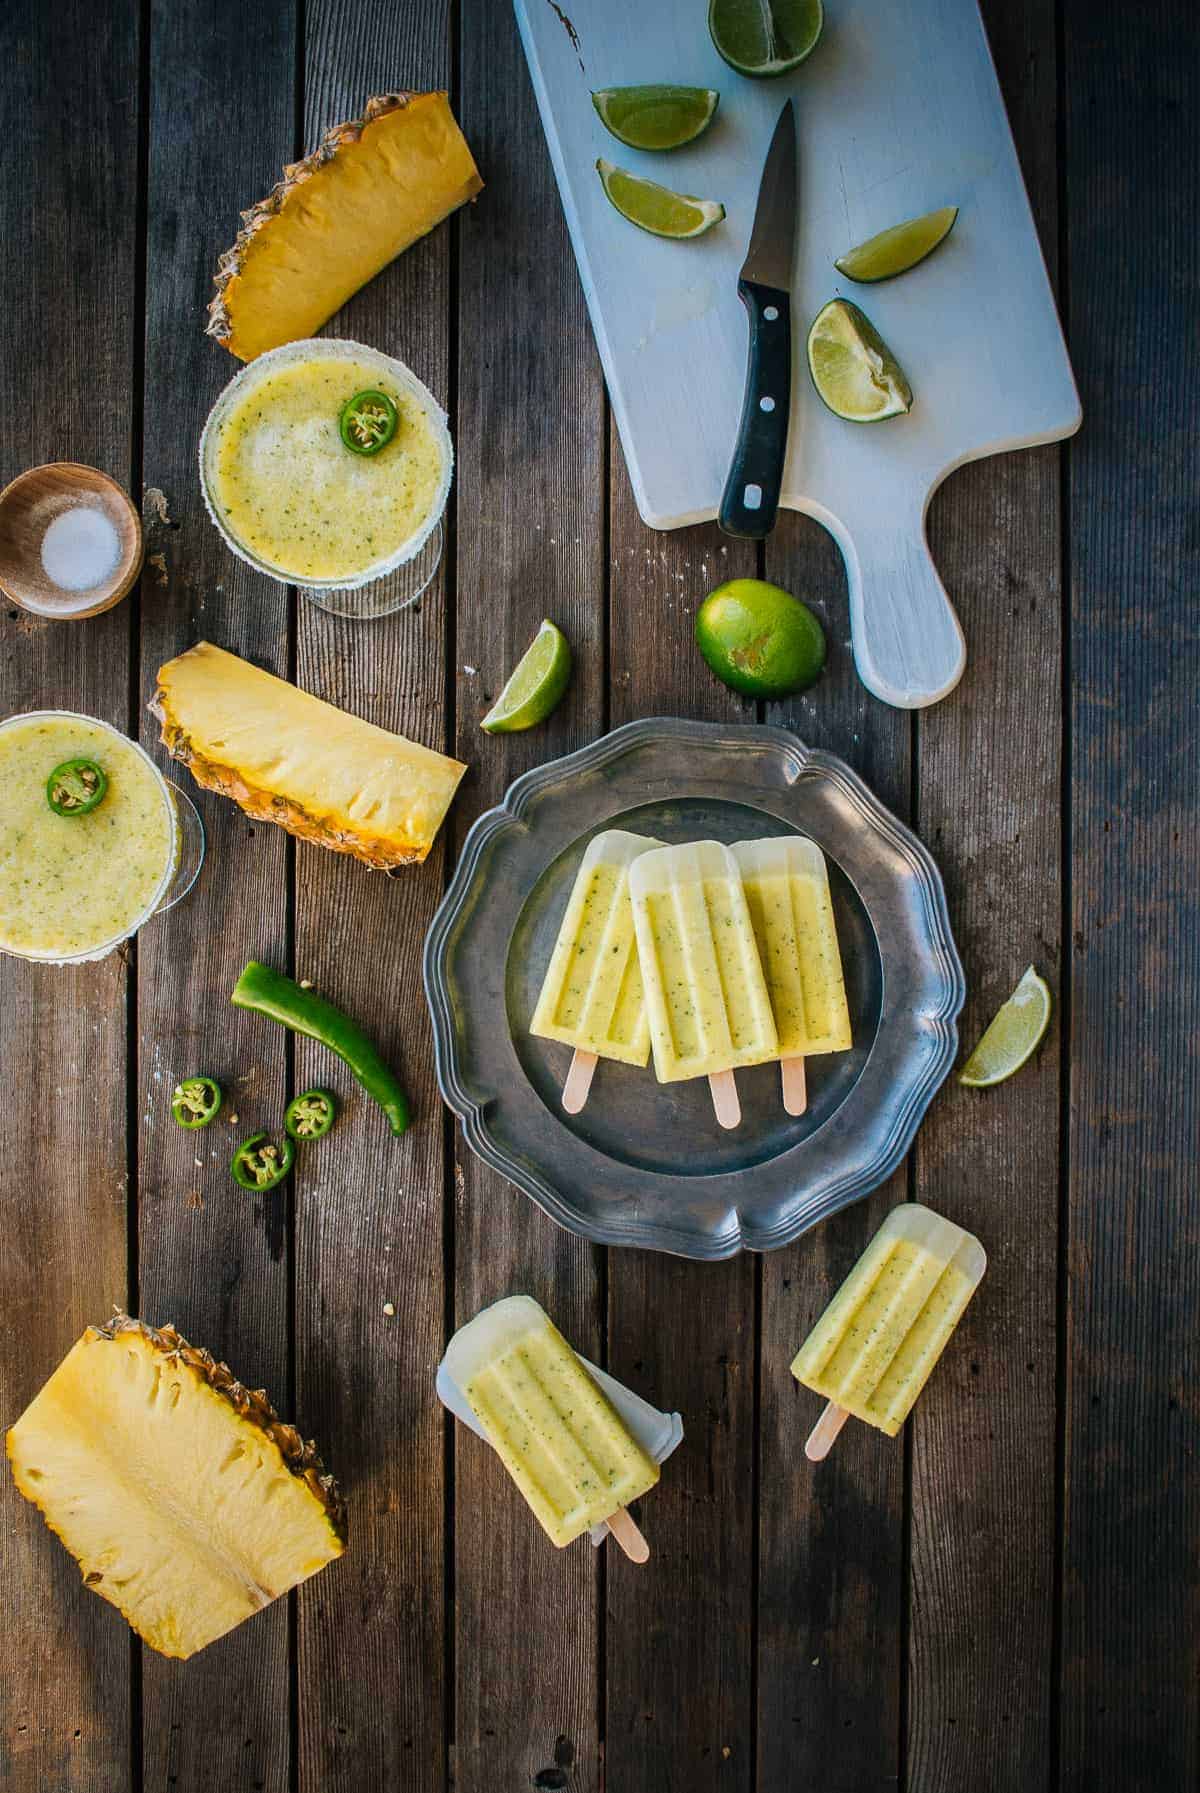 Homemade pineapple margarita ice pops served on a plate with fresh pineapple and limes